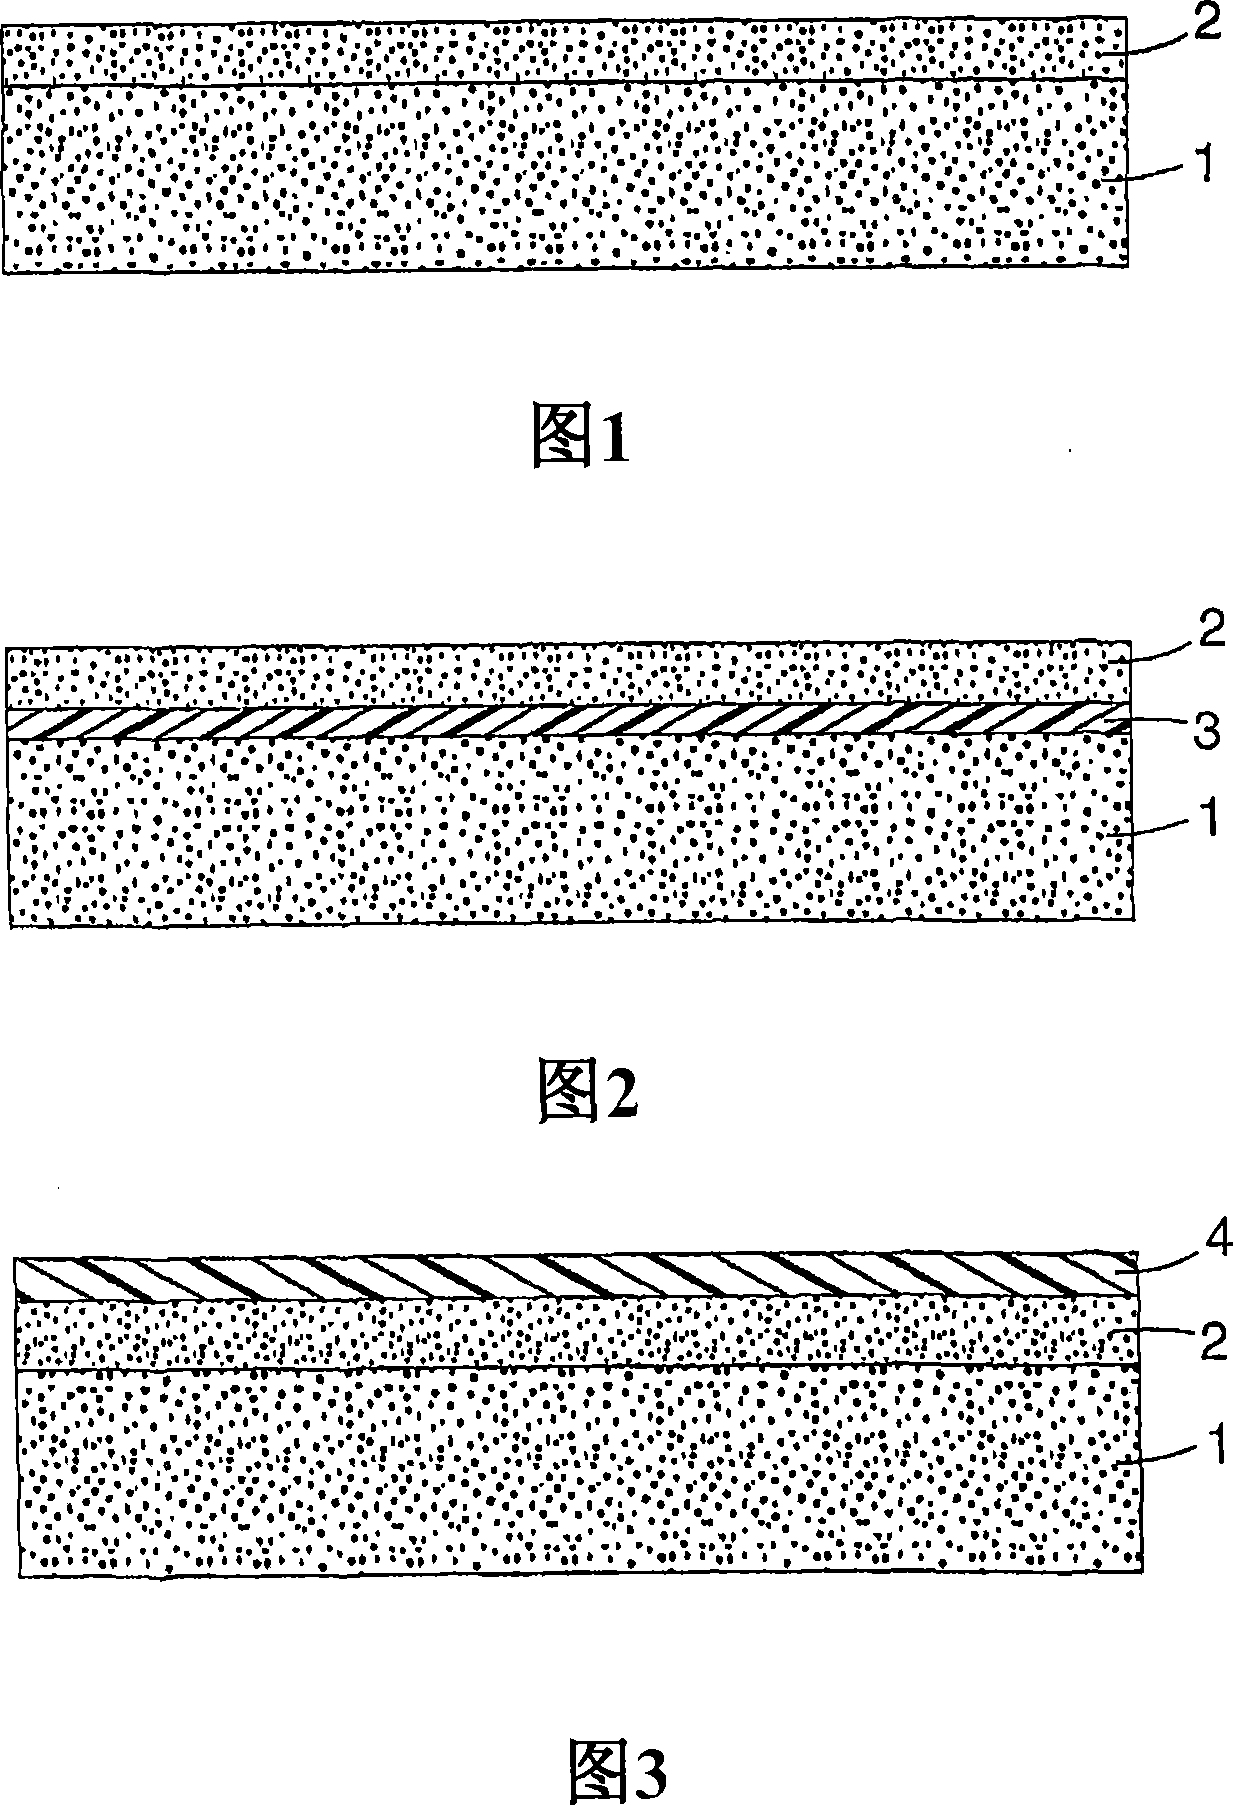 Heat-transferring adhesive tape with improved functionality